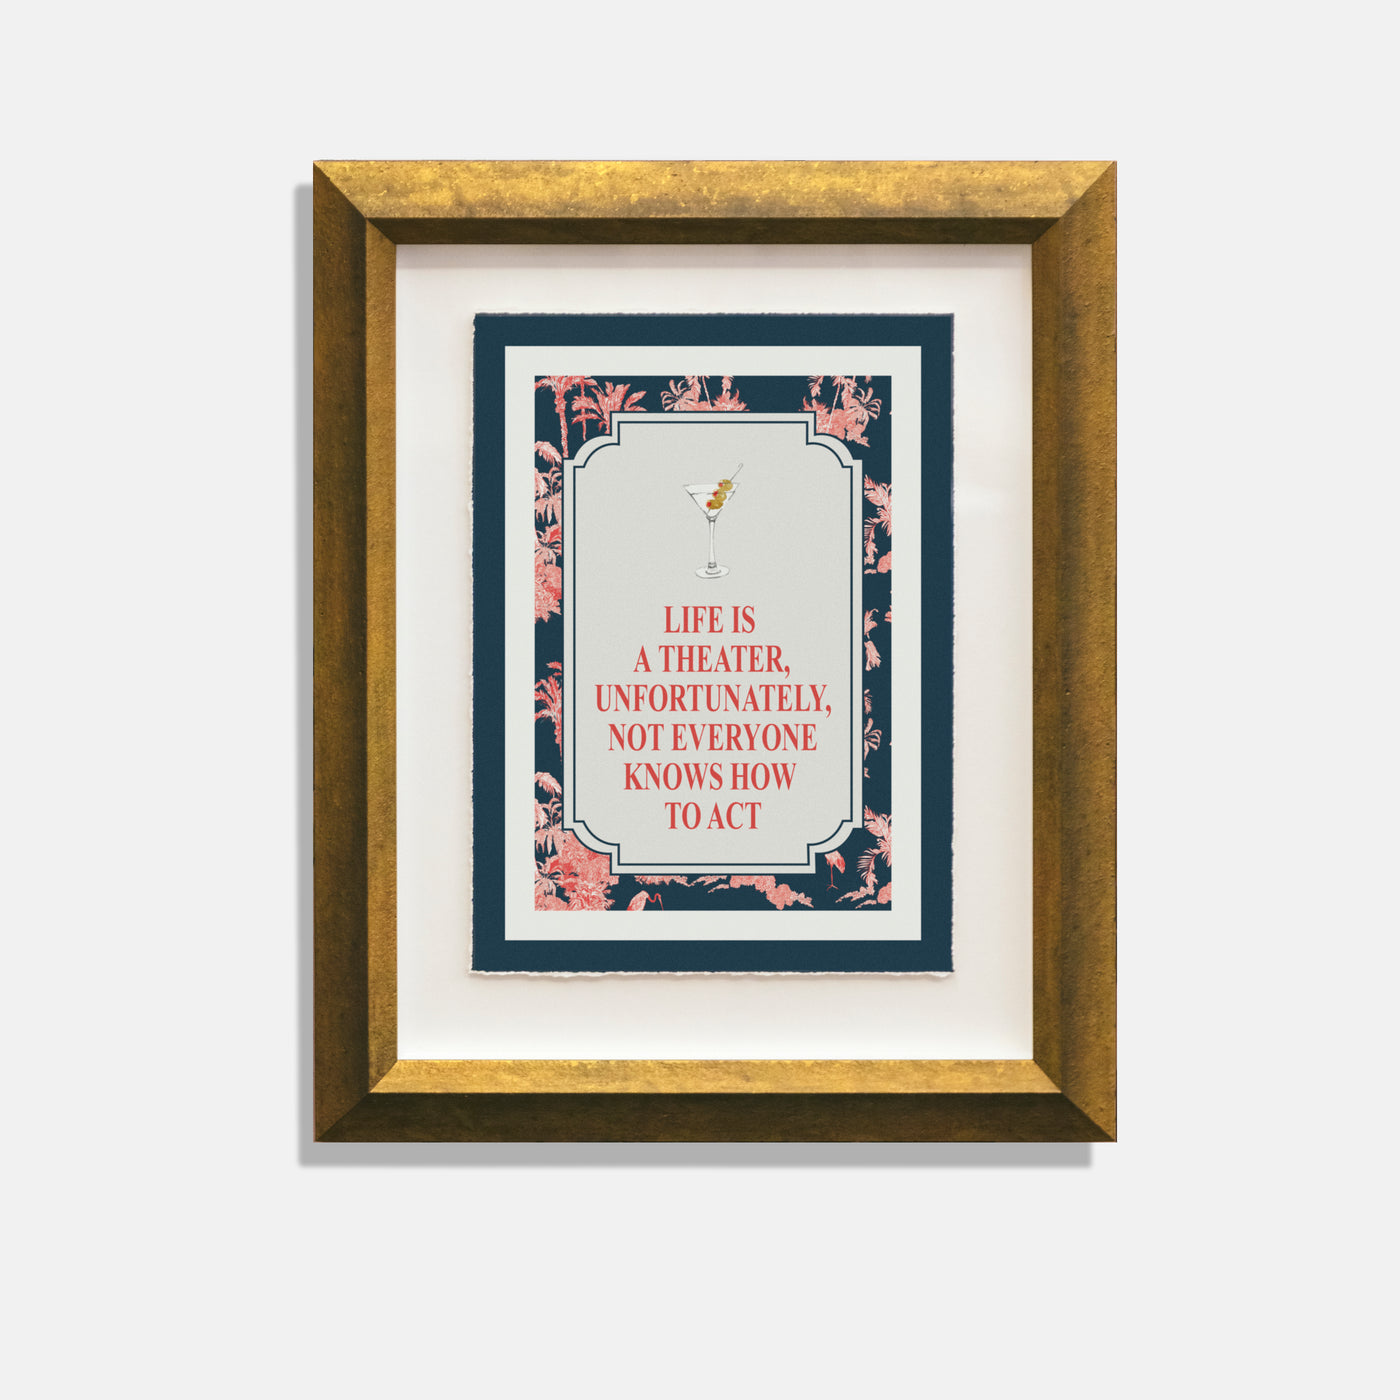 blue and pink palm print with martini glass. text "life is a theatre unfortunately not everyone knows how to act."